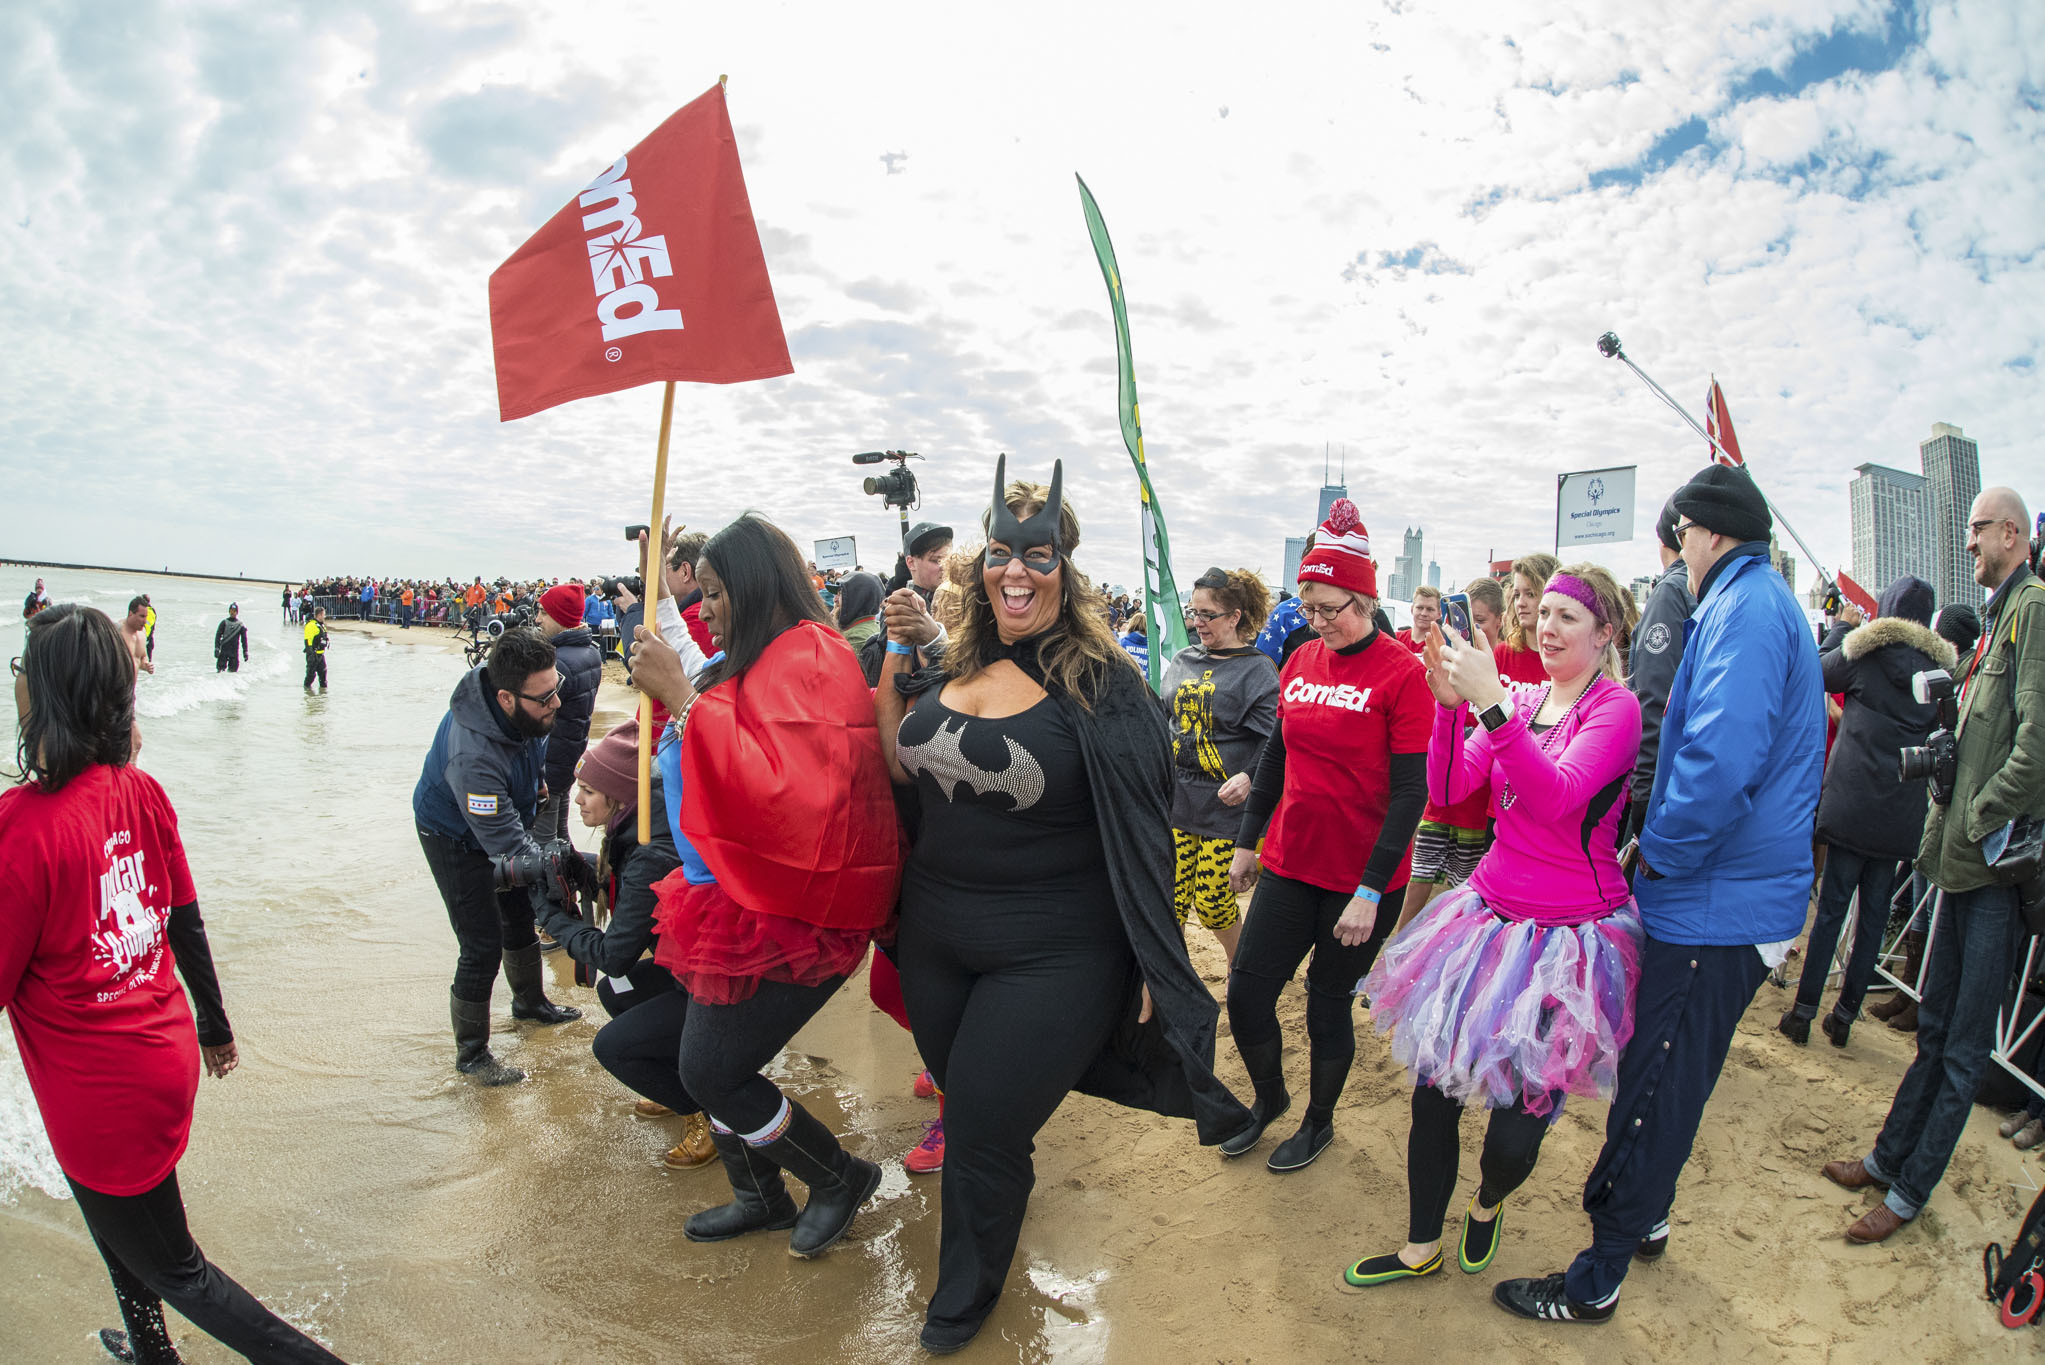 Thousands of Chicagoans took a chilly dip at the Chicago Polar Plunge